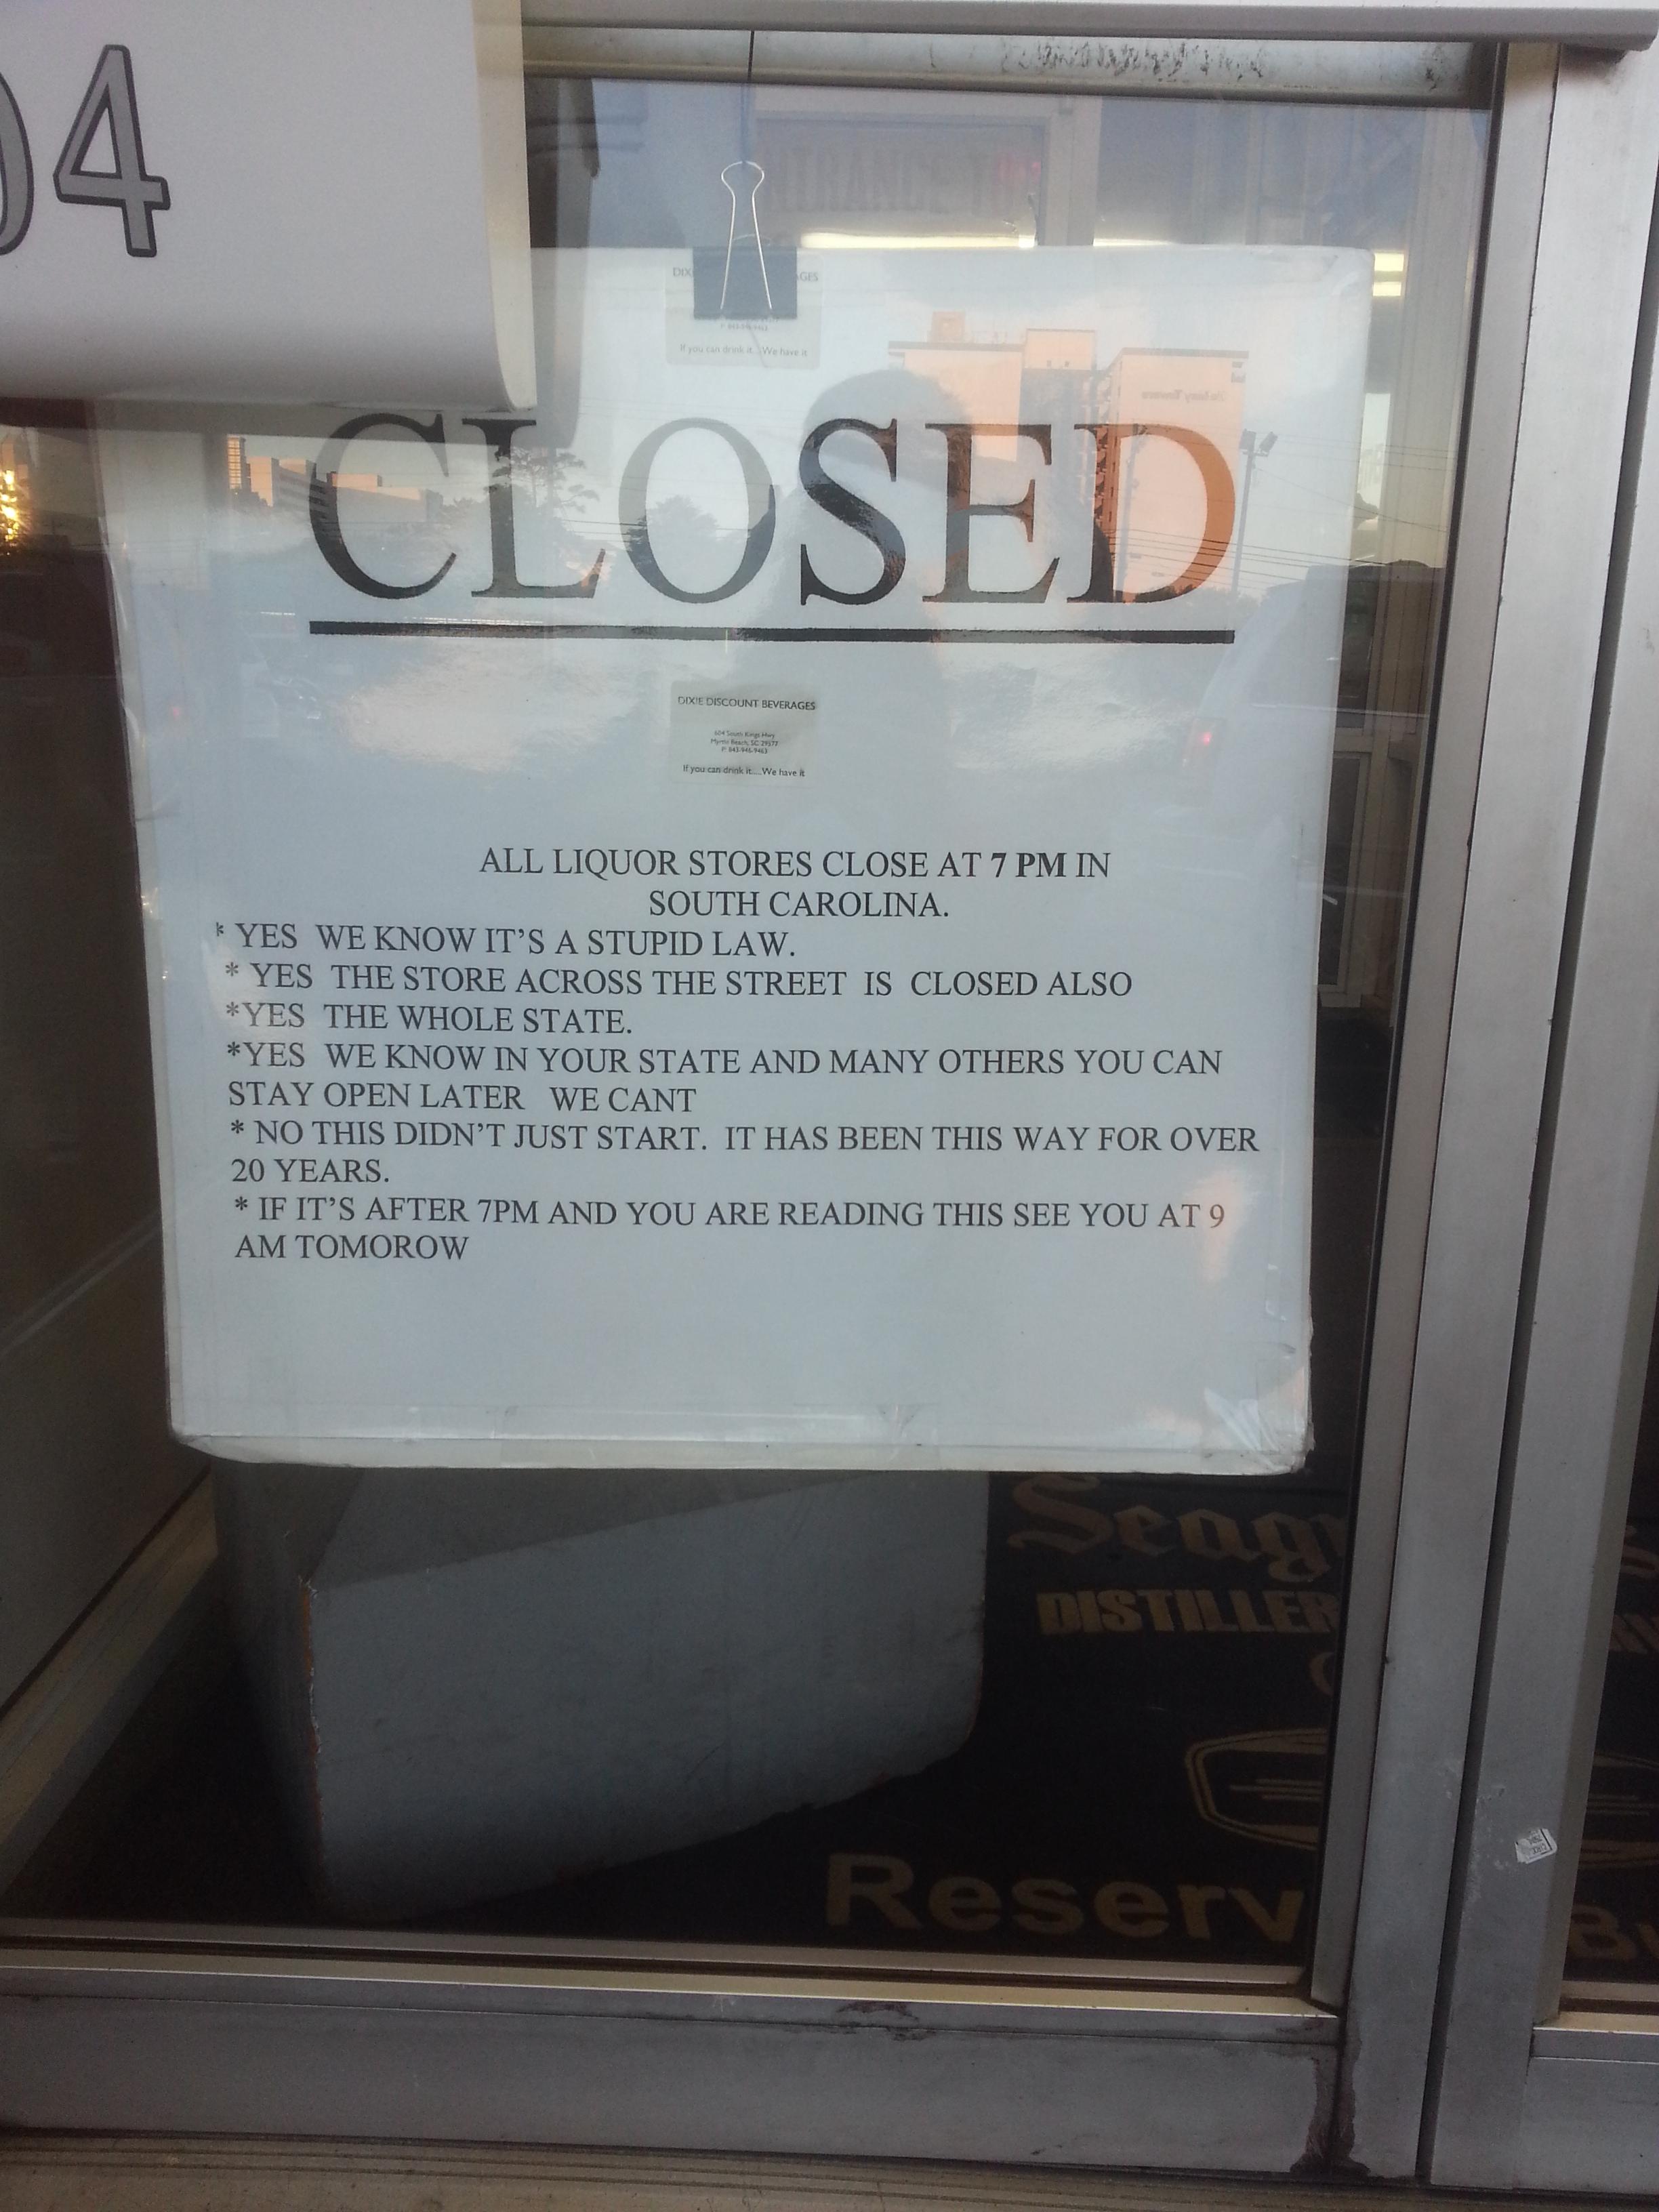 multimedia - "Closed All Liquor Storts Close At 7 Pm In South Carolina Yes We Know It'S Asilid Law Yes The Store Across The Street Is Closed Also Yes The Whole State Yes We Know In Your State And Many Others You Can Stay Opon Later We Cant No This Didn'T 